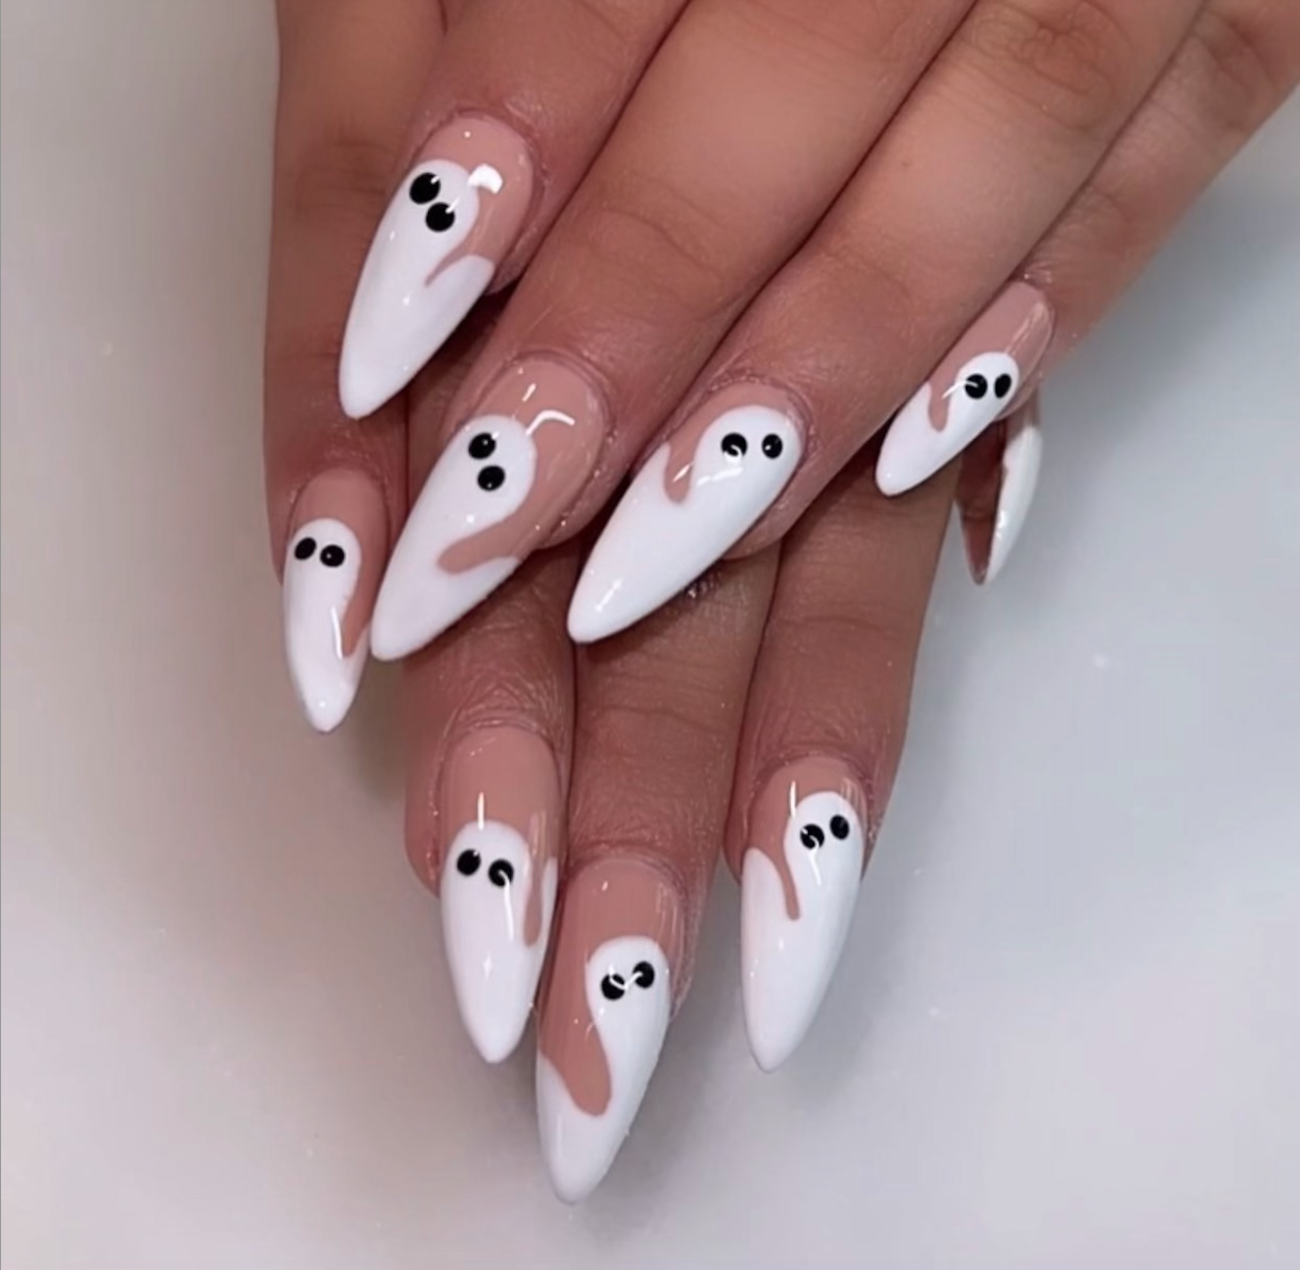 Ghosting never looked so much fun! Nail art by @beautybyhillsxx on IG